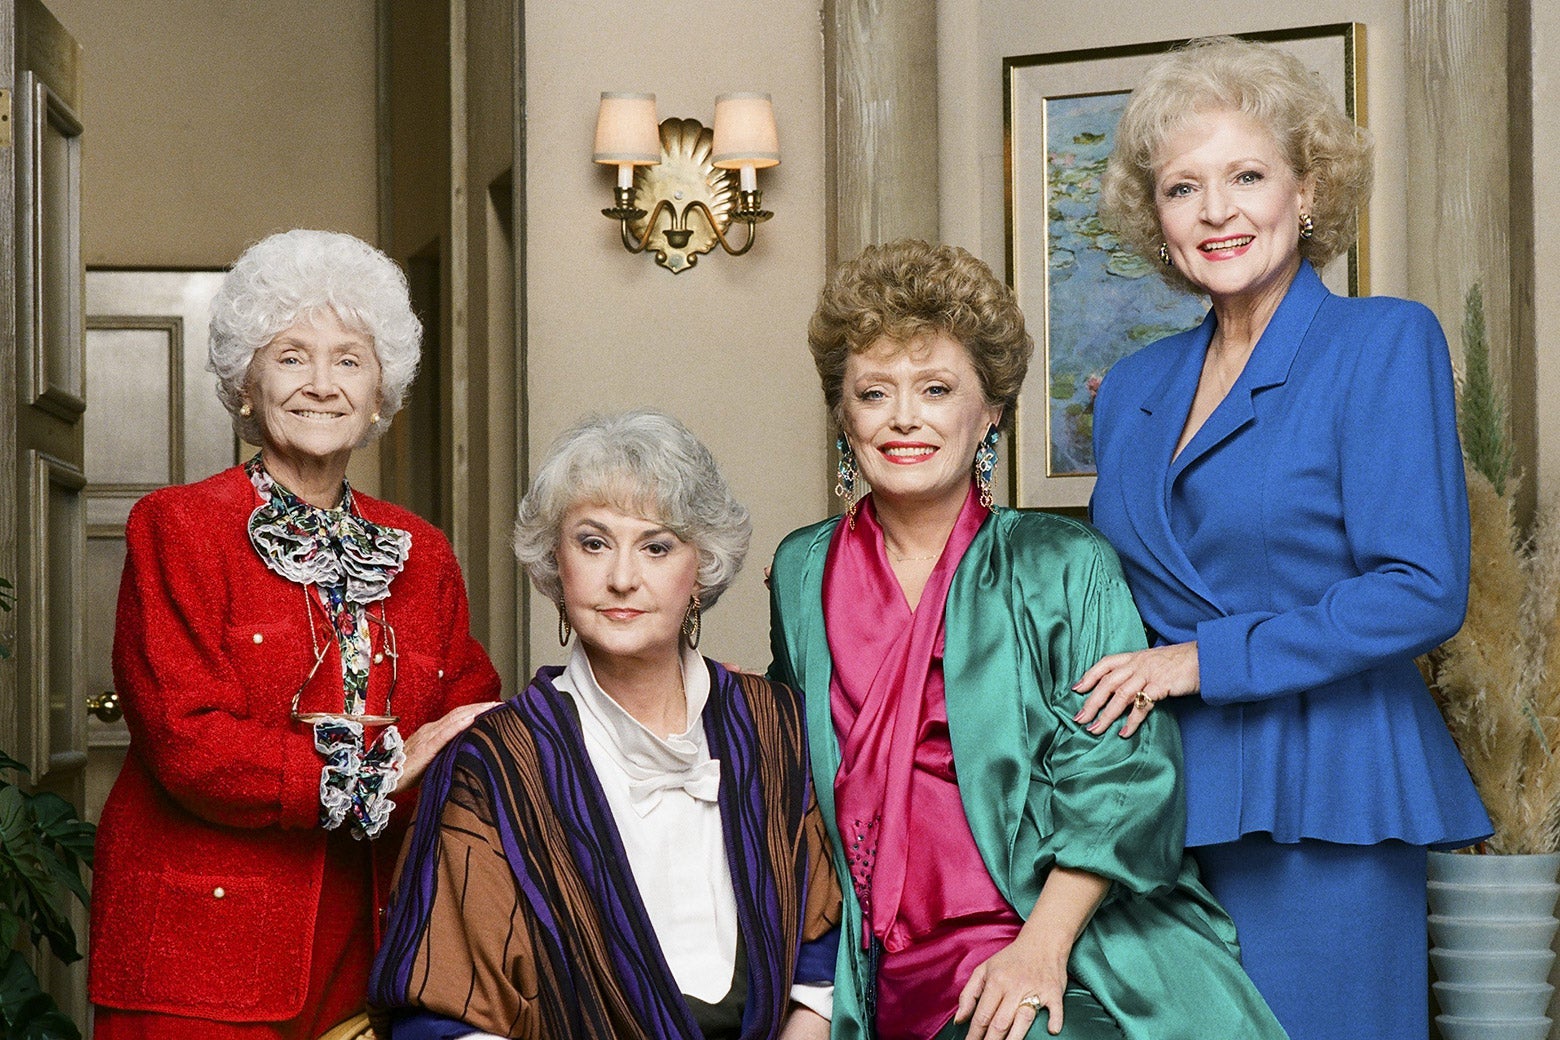 A photo of the cast of "The Golden Girls," from left to right: Estelle Getty, Bea Arthur, Rue McClanahan, and Betty White